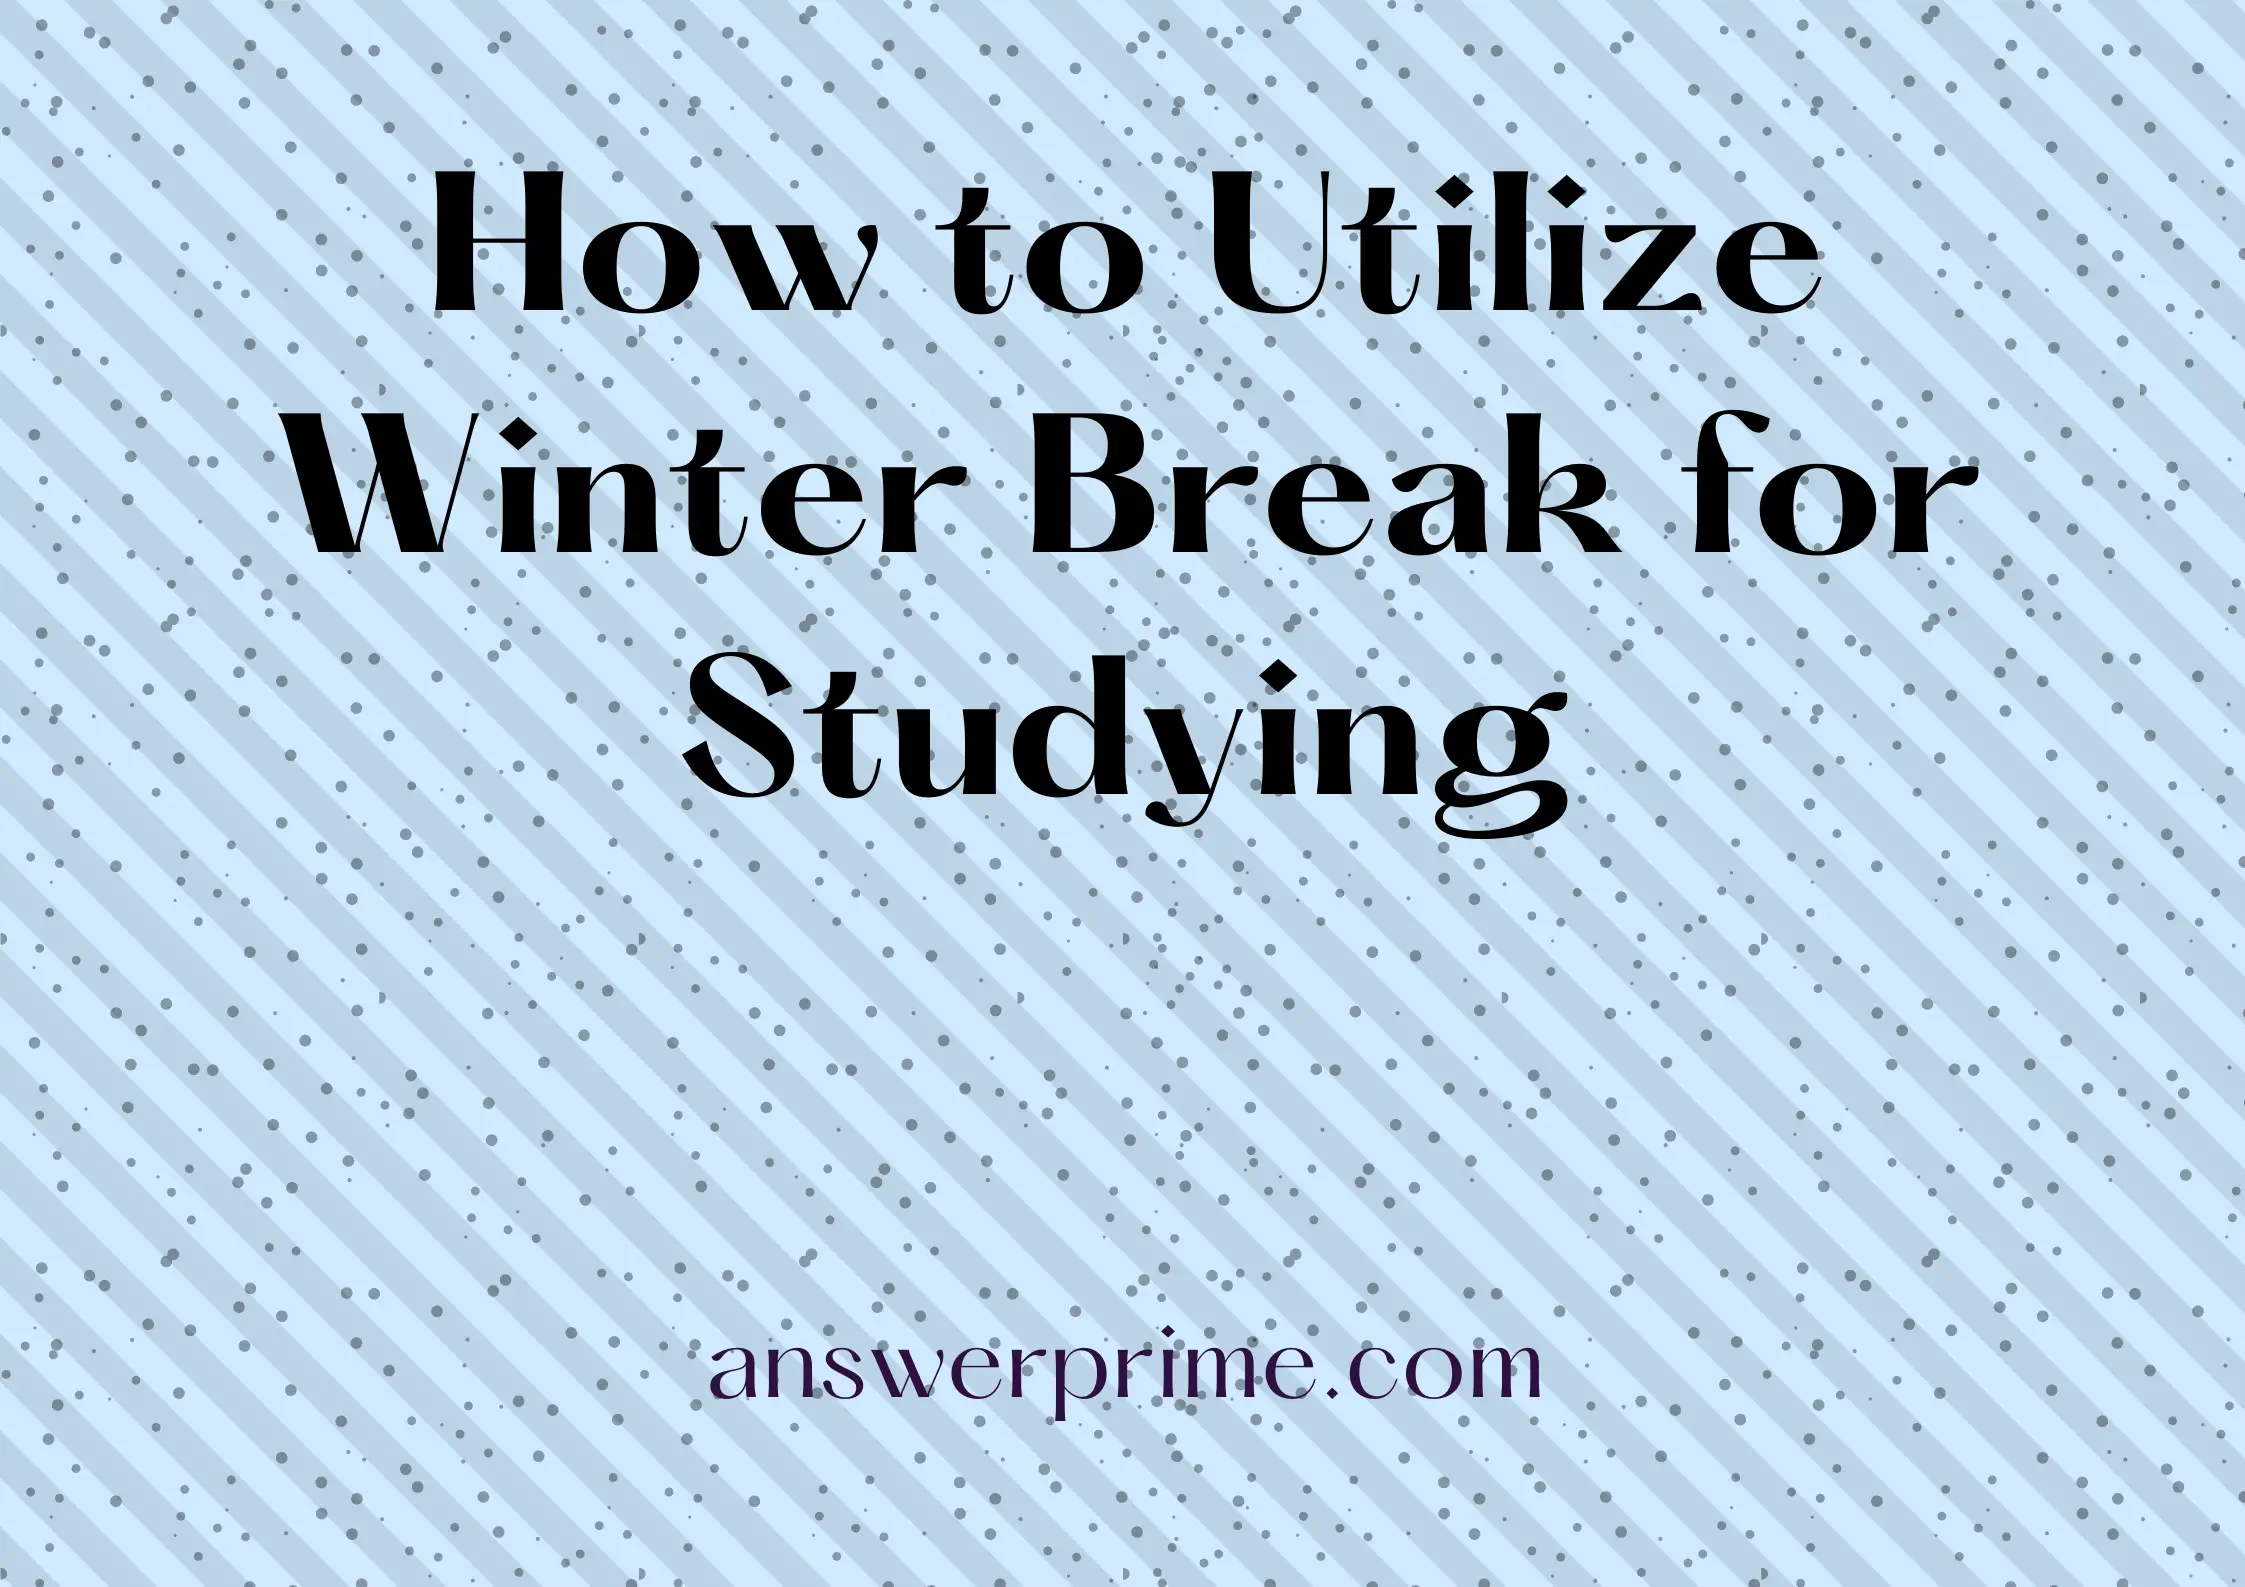 How to Utilize Winter Break for Studying